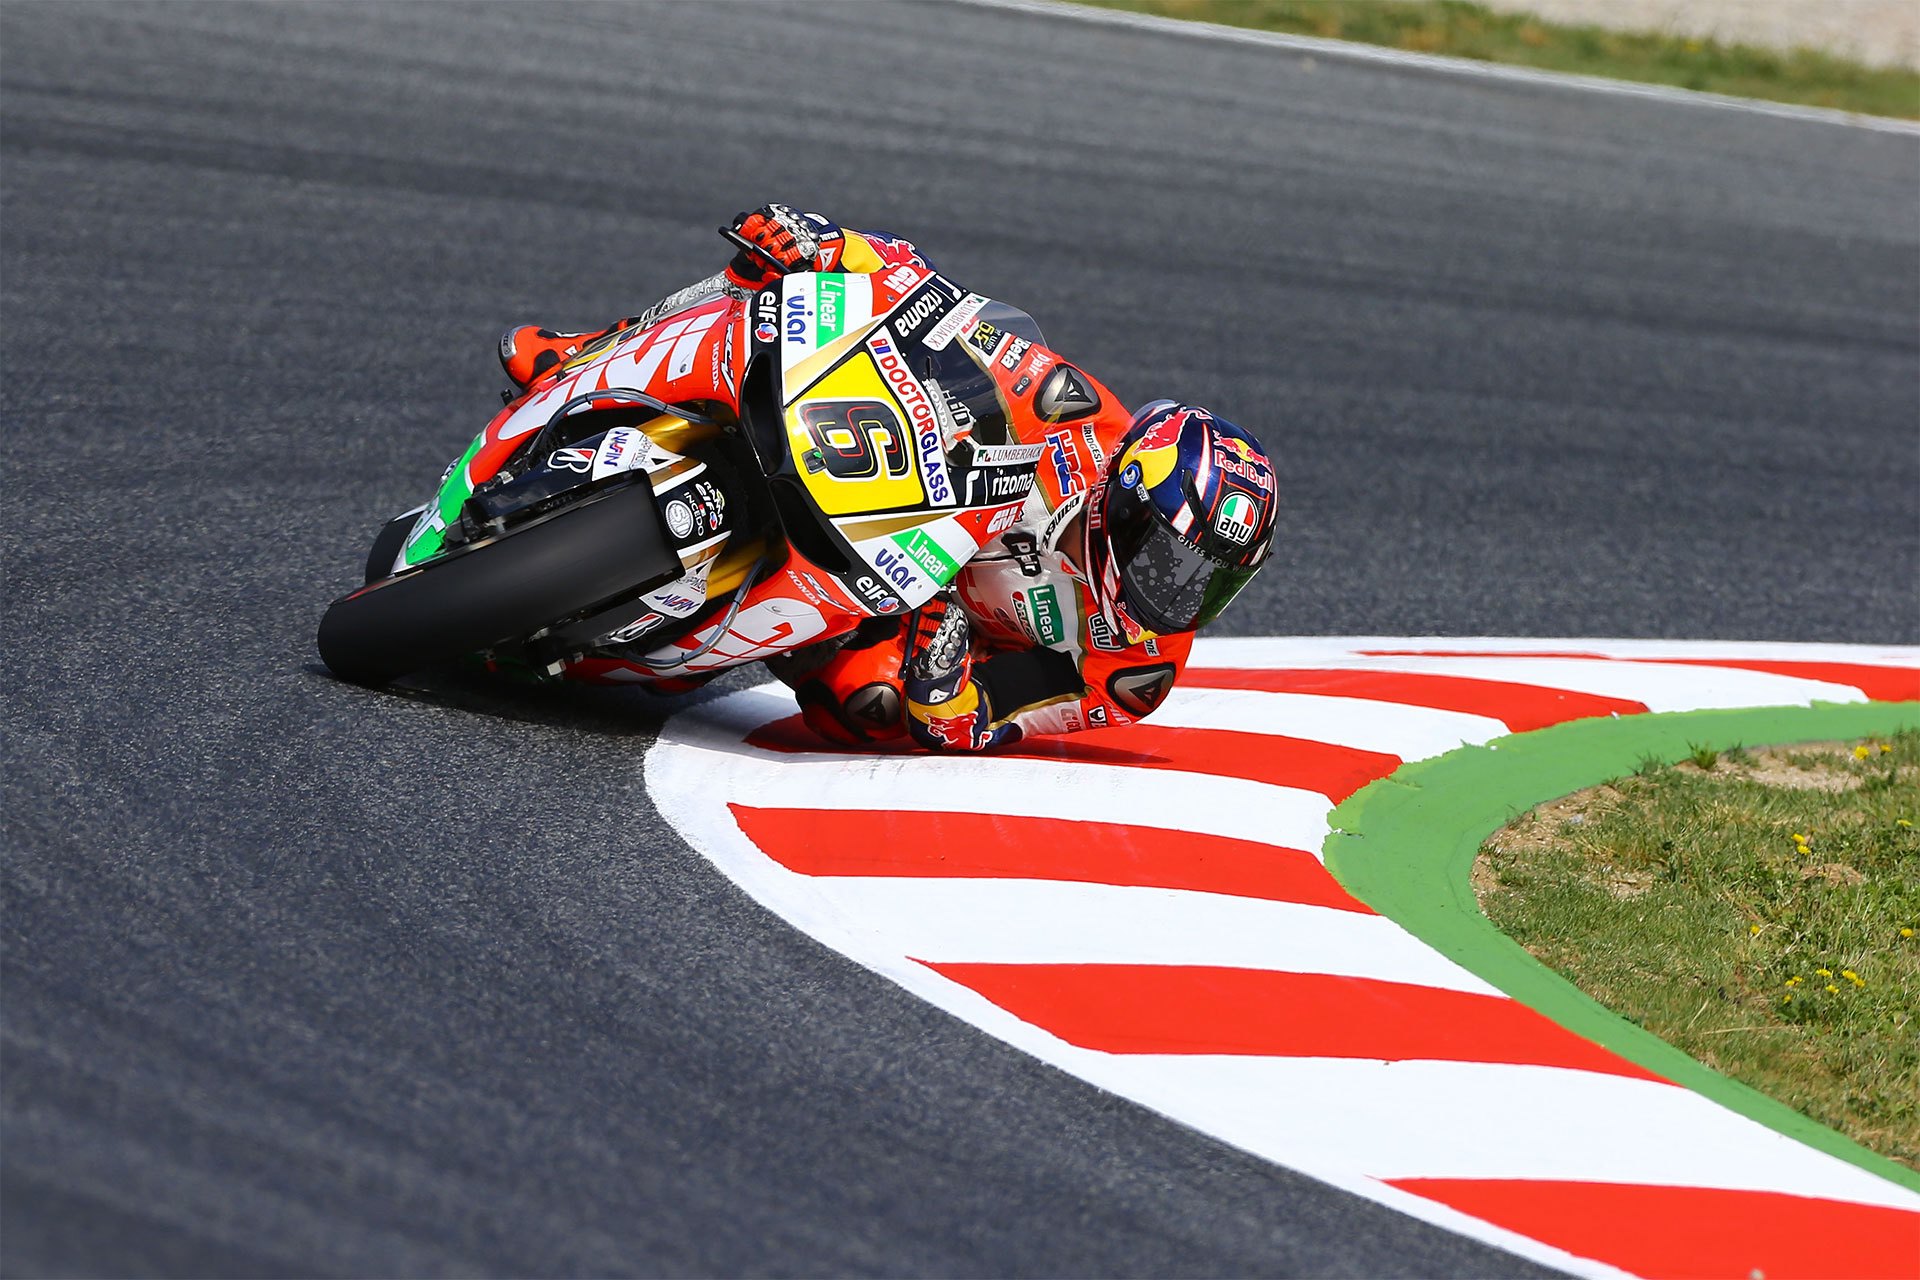 a rider takes a corner on a MotoGP circuit at an extreme lean angle